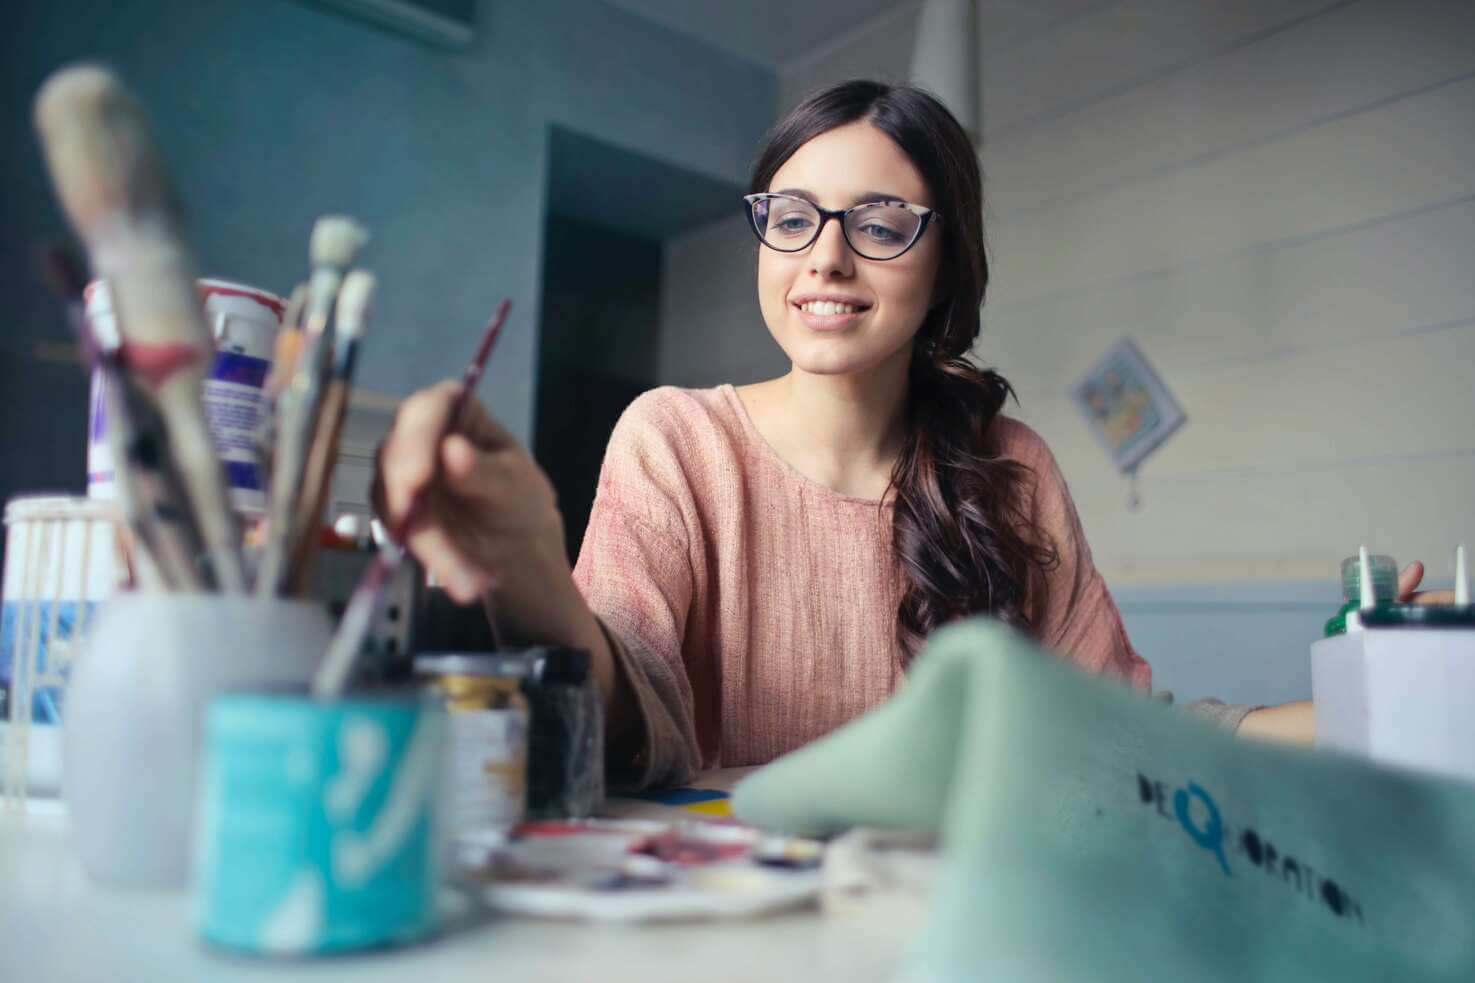 A woman with glasses holding a paintbrush.